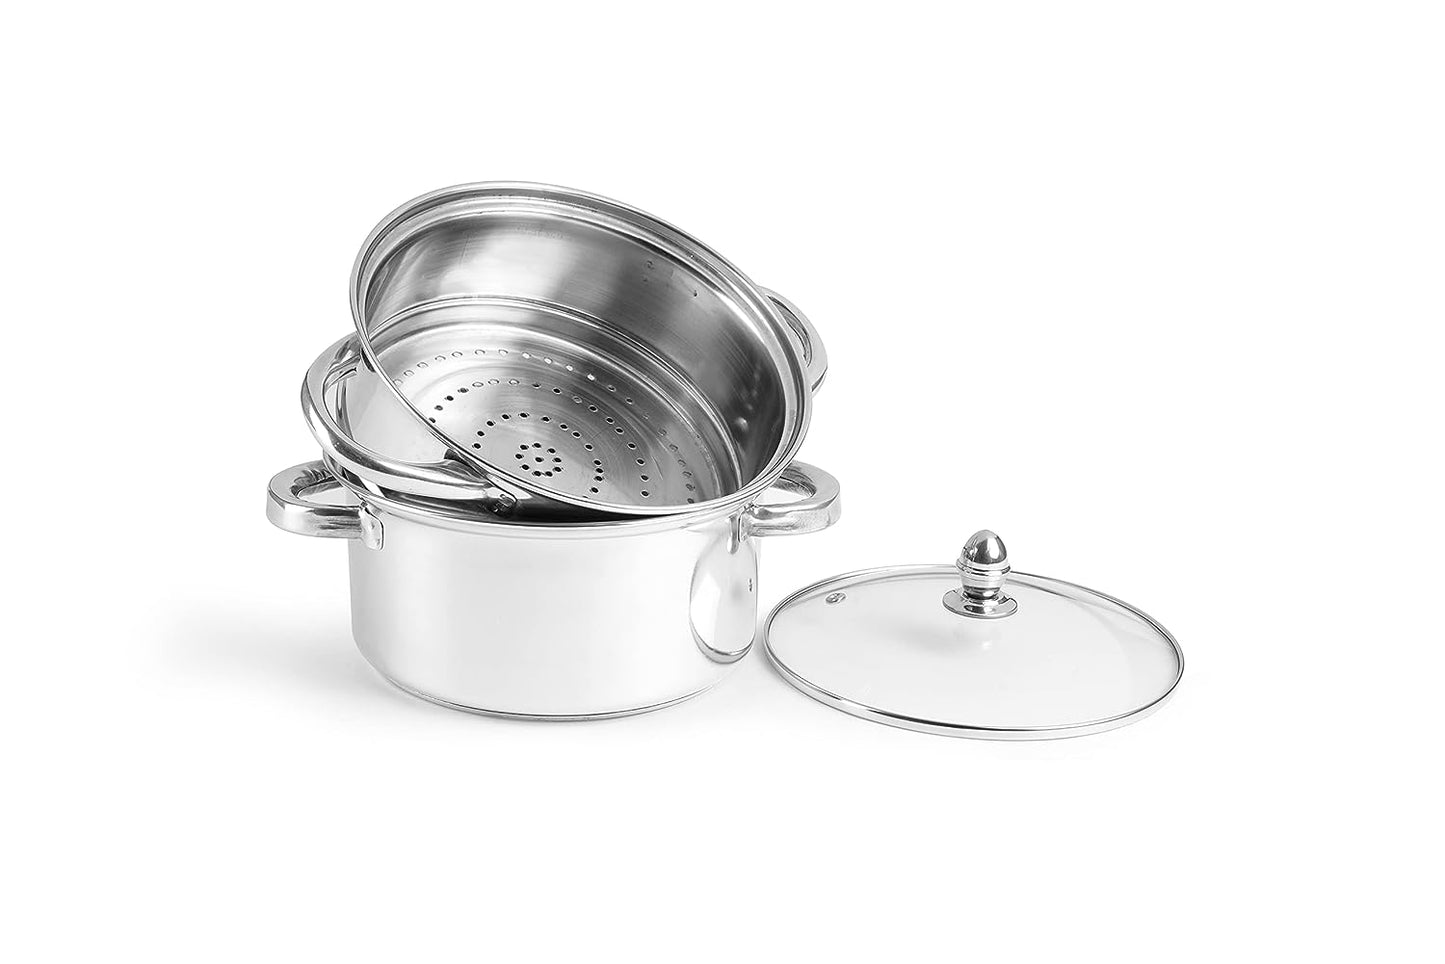 Pigeon Elantra Stainless Steel 2 Tier Steamer Pot Set with Glass Lid | Pasta Steamer Momo/Modak Maker | Vegetable Steamer | Rice Steamer 20 cm | Induction and Gas Stove Compatible - 50313